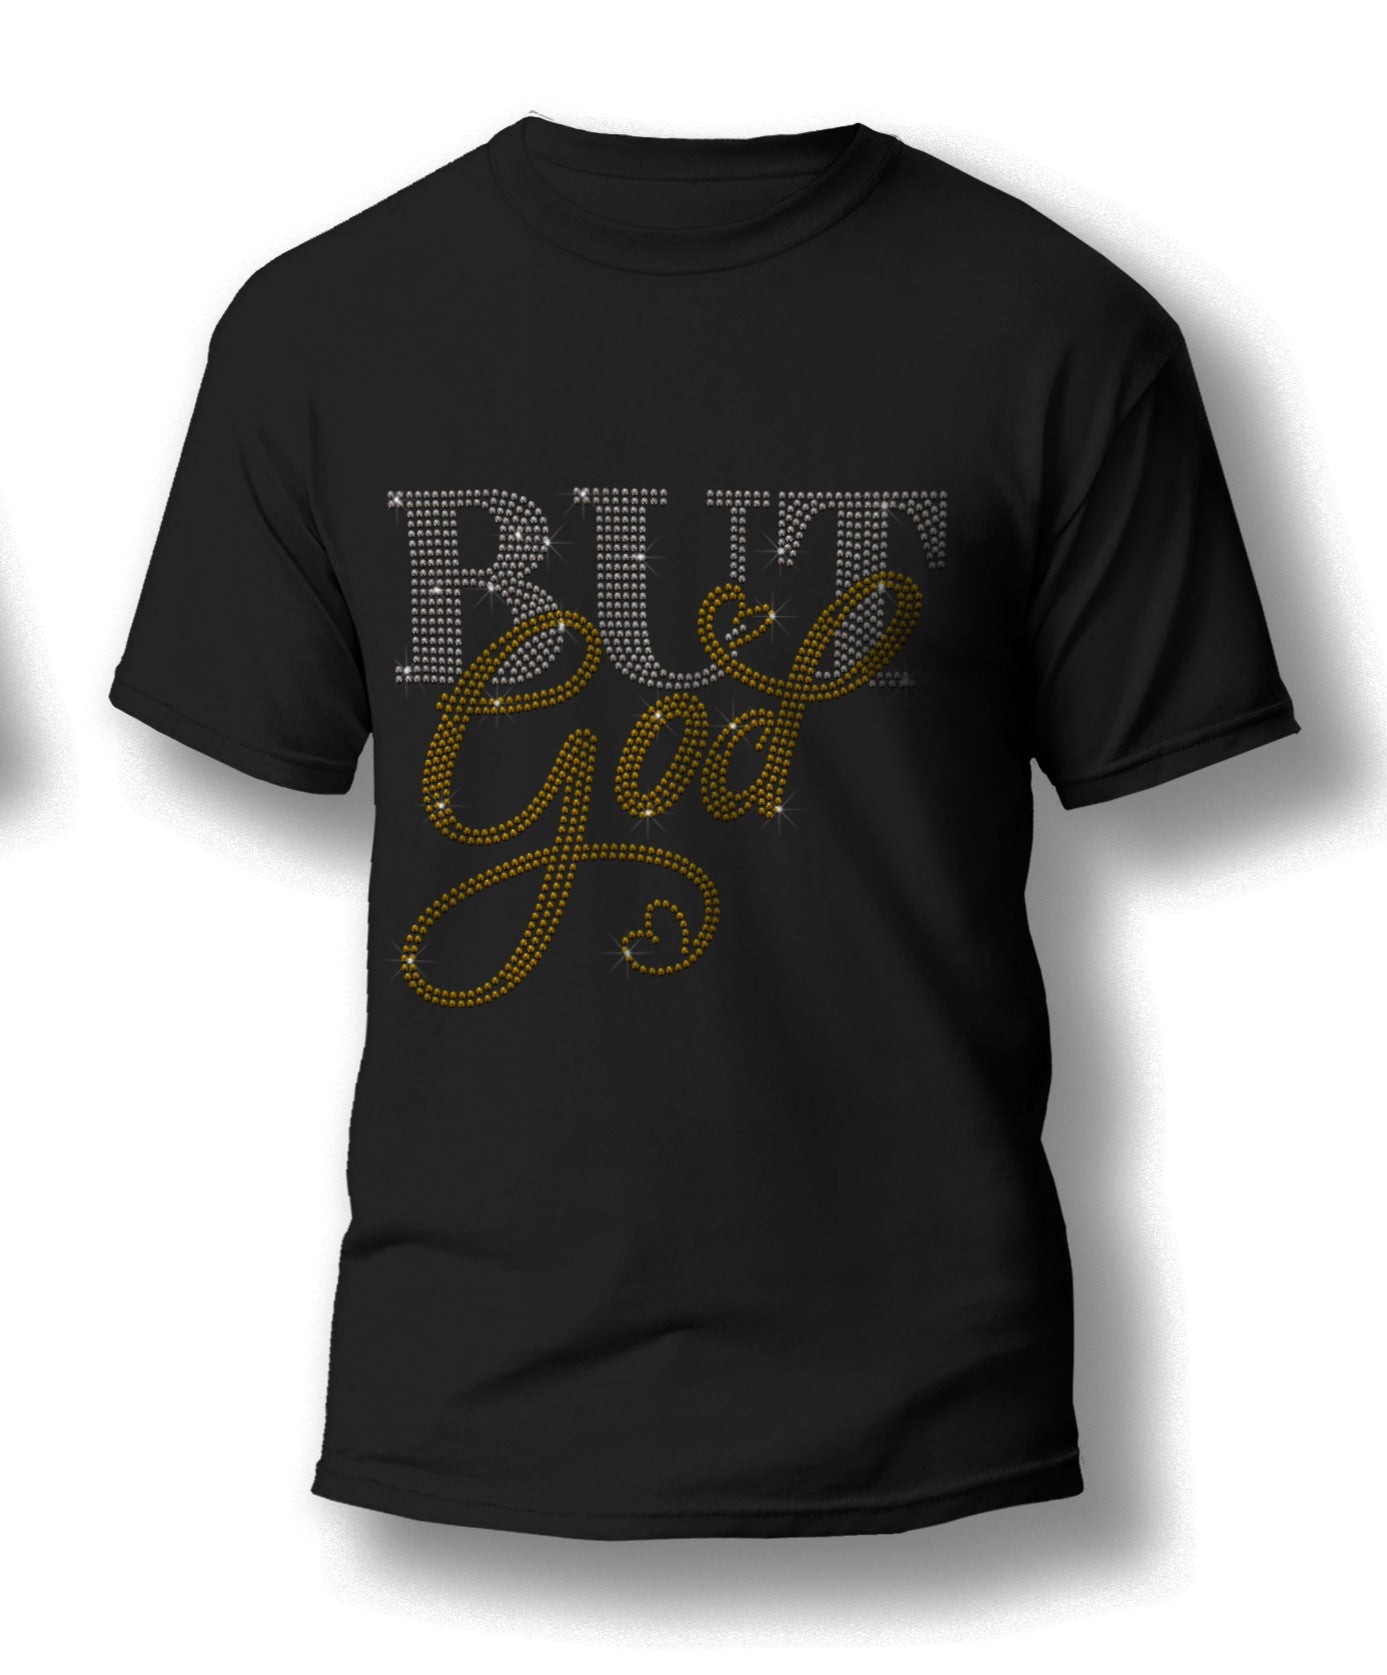 Our "But God" Rhinestone T-Shirts are a beautiful expression of faith and hope, available in two timeless colors, black and white. What sets these shirts apart is that you get to choose your two favorite rhinestone colors to accentuate the message, making each shirt a unique and personal reflection of your beliefs.